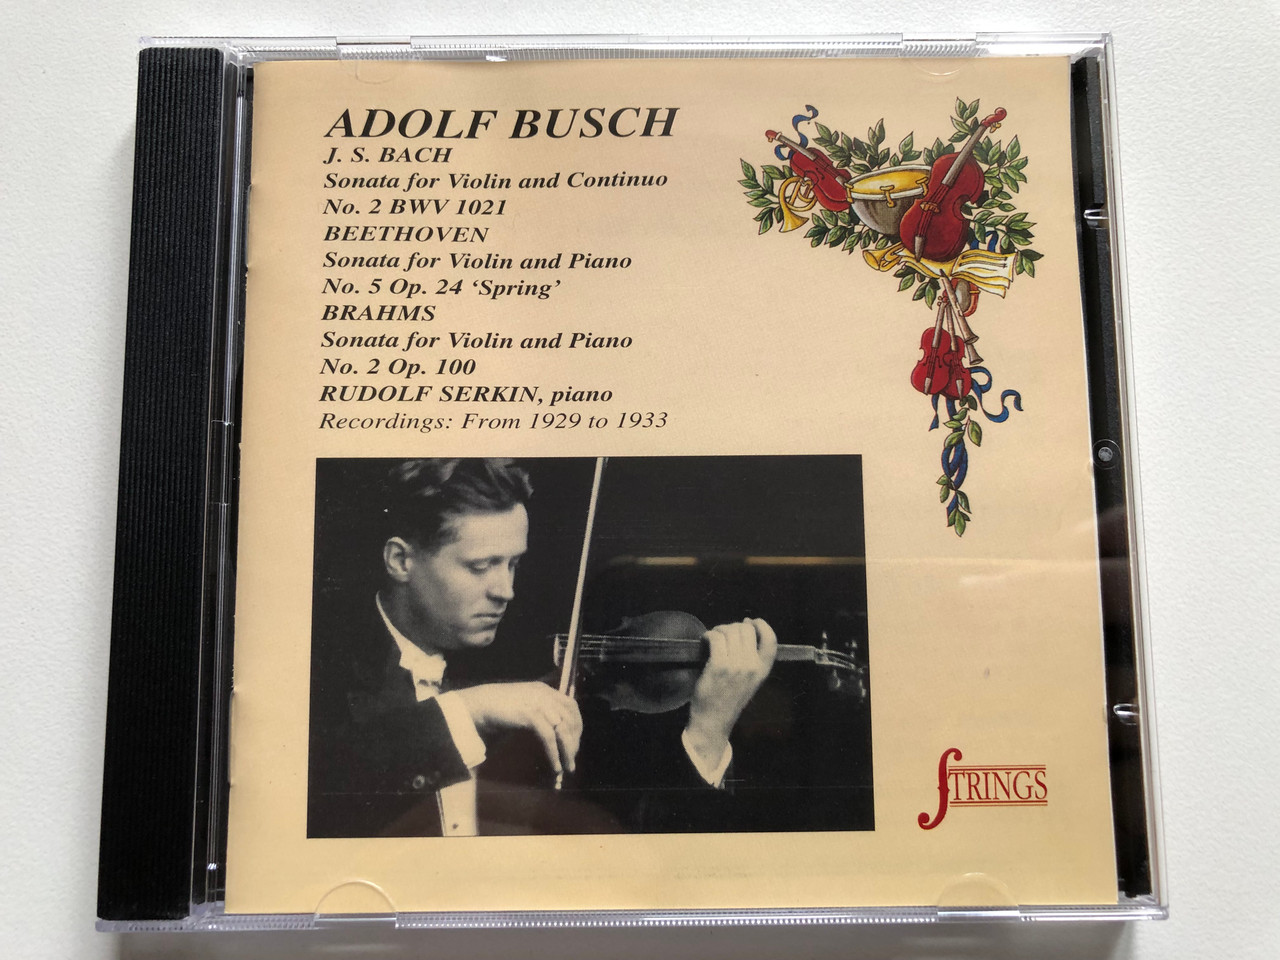 https://cdn11.bigcommerce.com/s-62bdpkt7pb/products/0/images/317147/Adolf_Busch_-_J.S._Bach_Sonata_For_Violin_And_Continuo_No._2_BWV_1021_Beethoven_Sonata_for_Violin_and_Piano_No._5_Op._24_Sprin_Brahms_Sonata_for_Violin_and_Piano_No._2_Op._100_-_Rudolf_Se_1__12964.1703155096.1280.1280.JPG?c=2